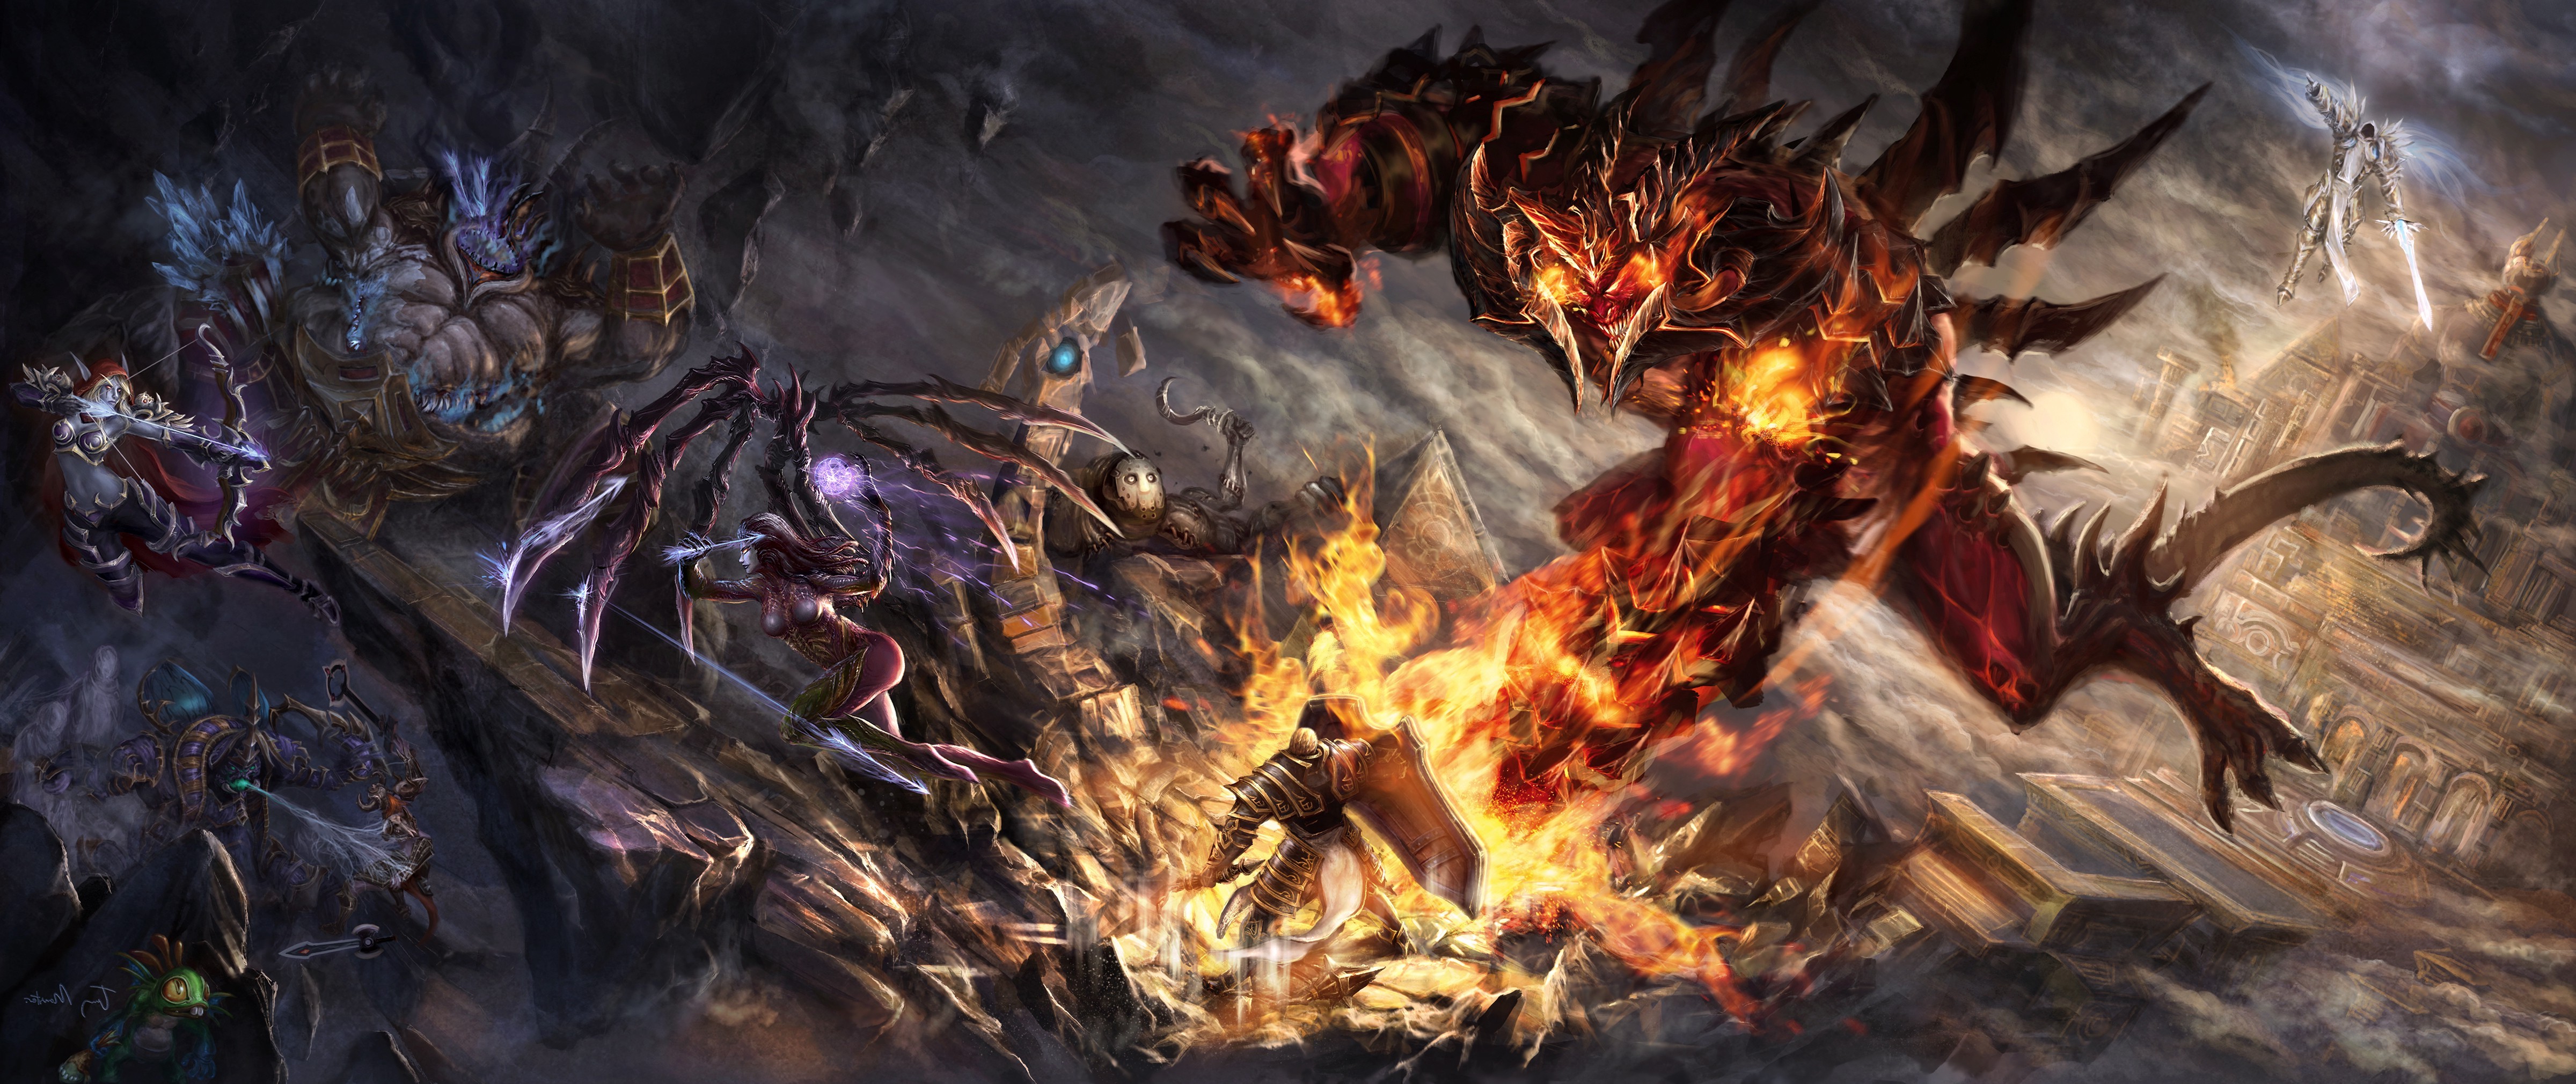 Heroes Of The Storm Hd Wallpaper - Pc Game , HD Wallpaper & Backgrounds